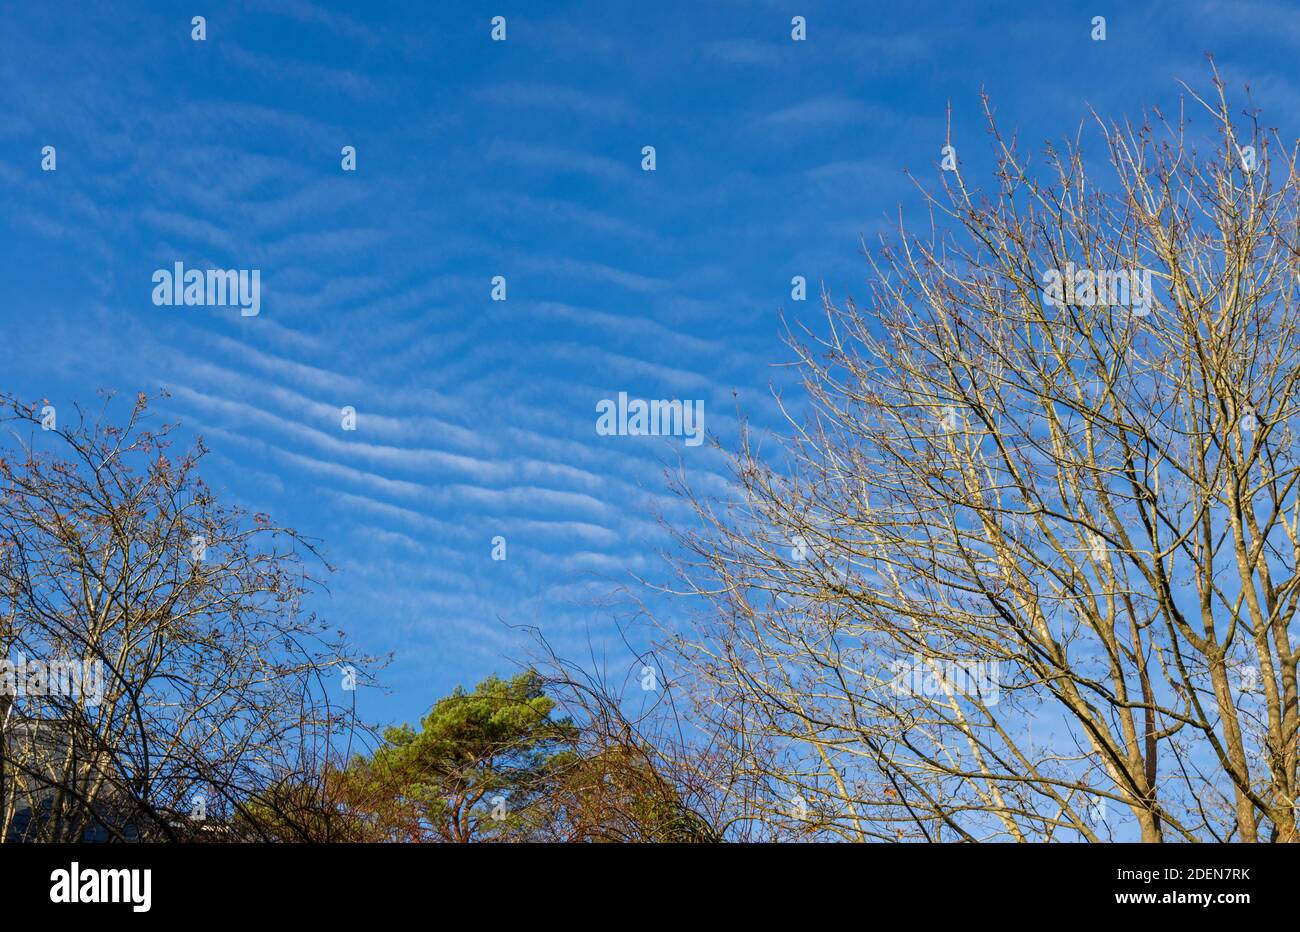 A blue mackerel sky with typical white, undulating, rippling pattern Cirrocumulus clouds, indicative of changeable weather, over Surrey, south-east En Stock Photo